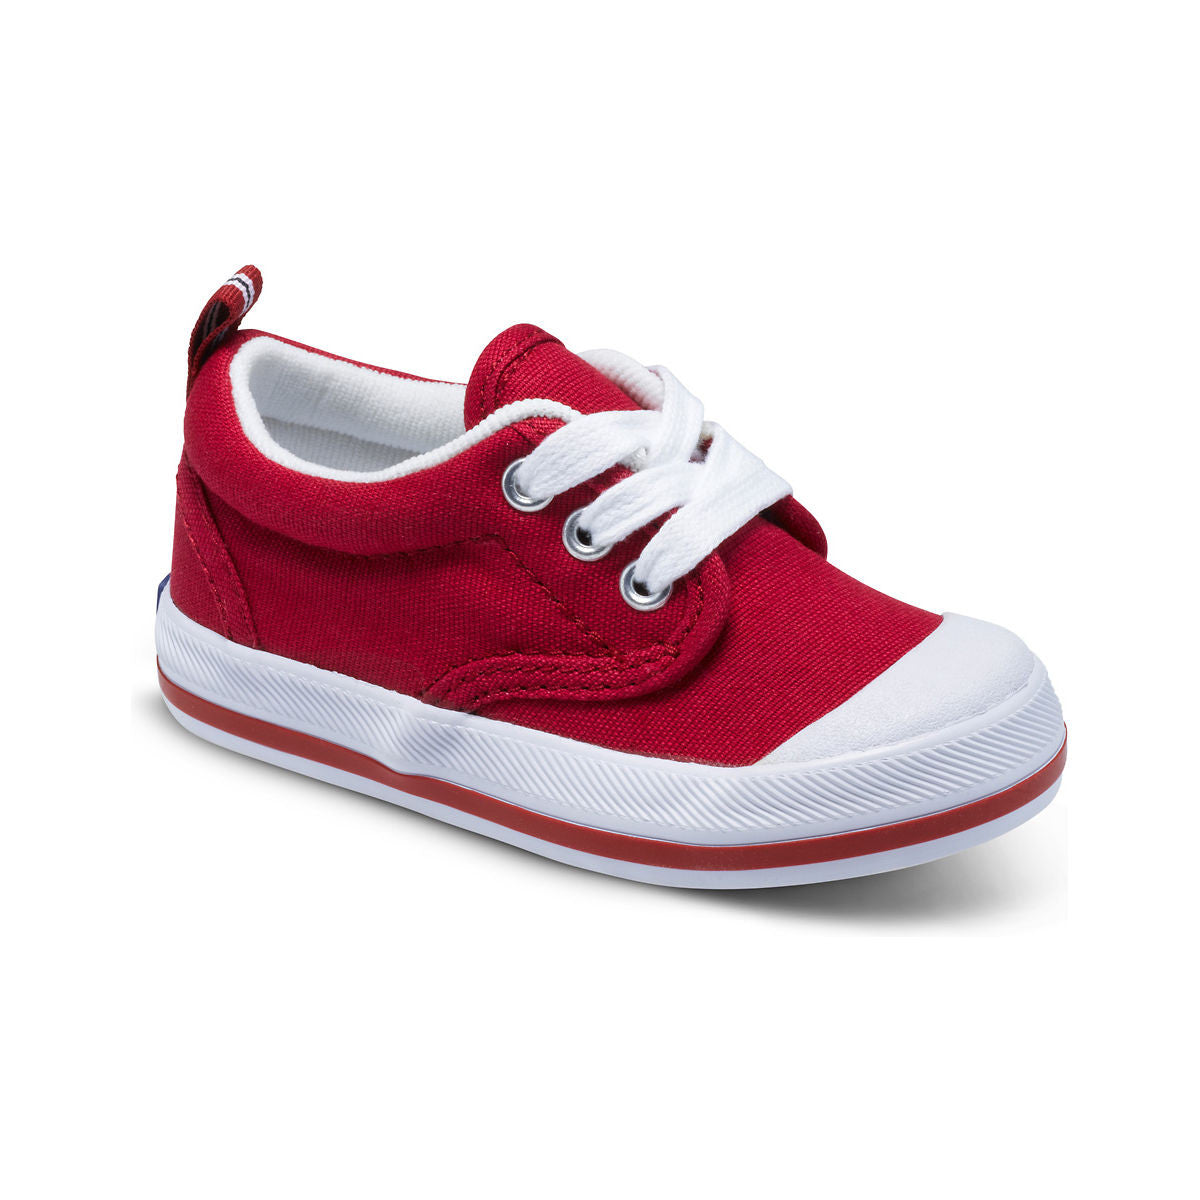 Graham - Red by Keds - Ponseti's Shoes